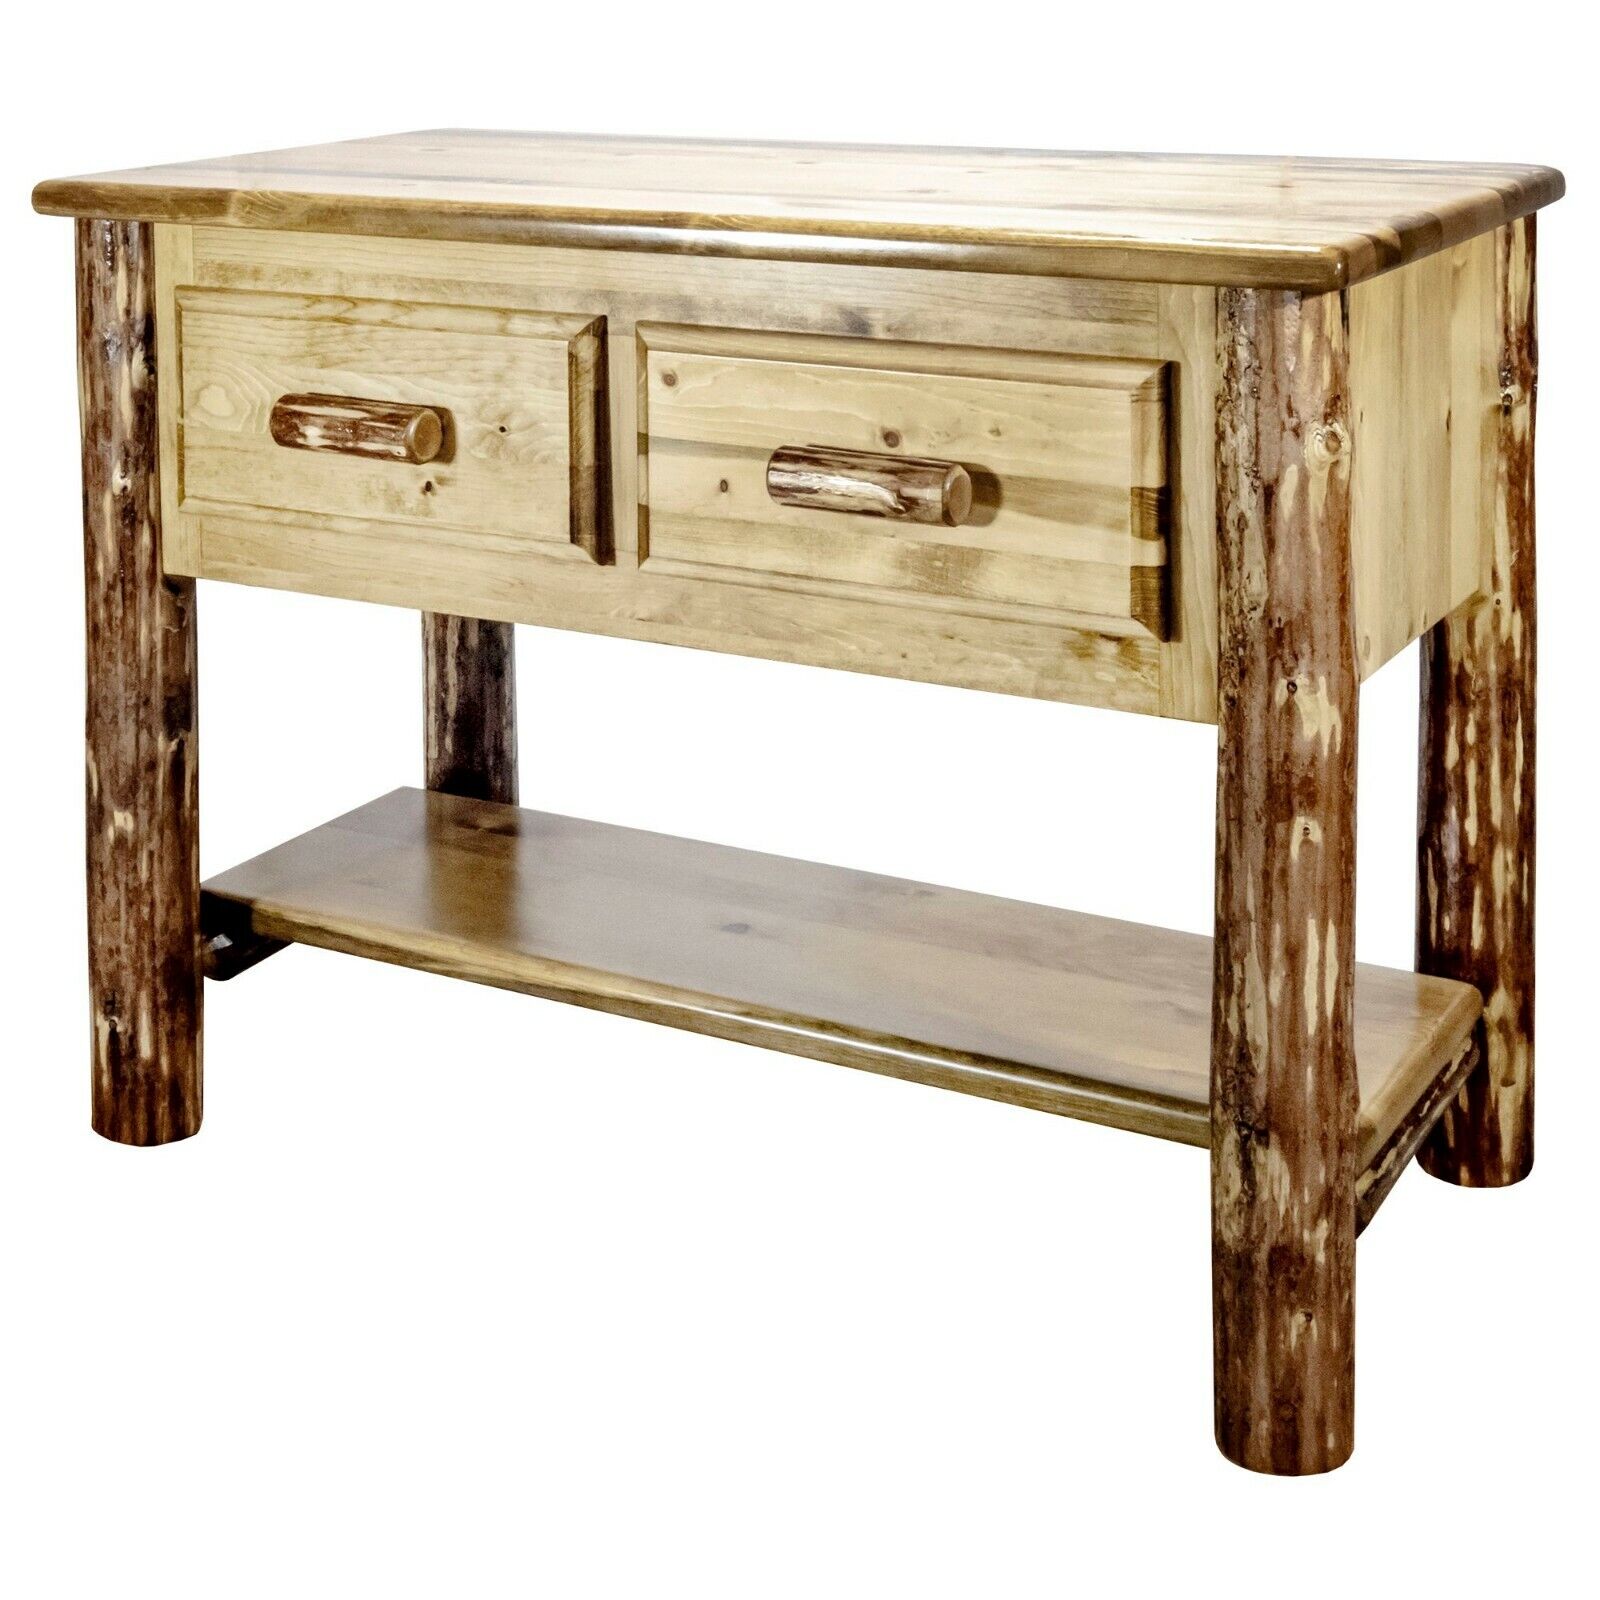 Log Entry Way Foyer Table with Drawers Amish Made Handcrafted Cabin Furniture 